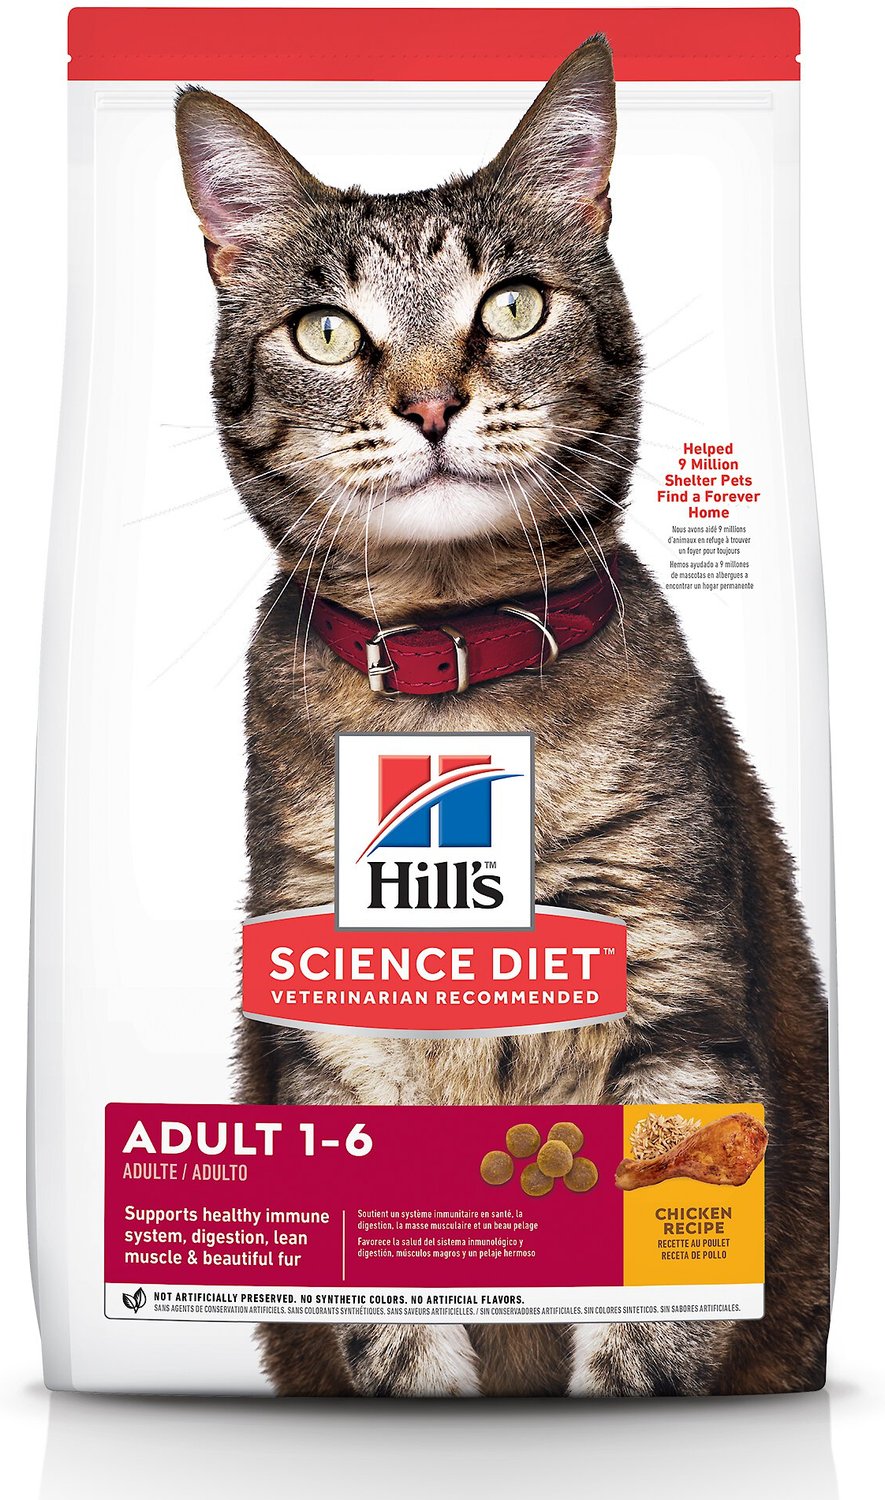 HILL'S SCIENCE DIET Adult Chicken Recipe Dry Cat Food, 16lb bag